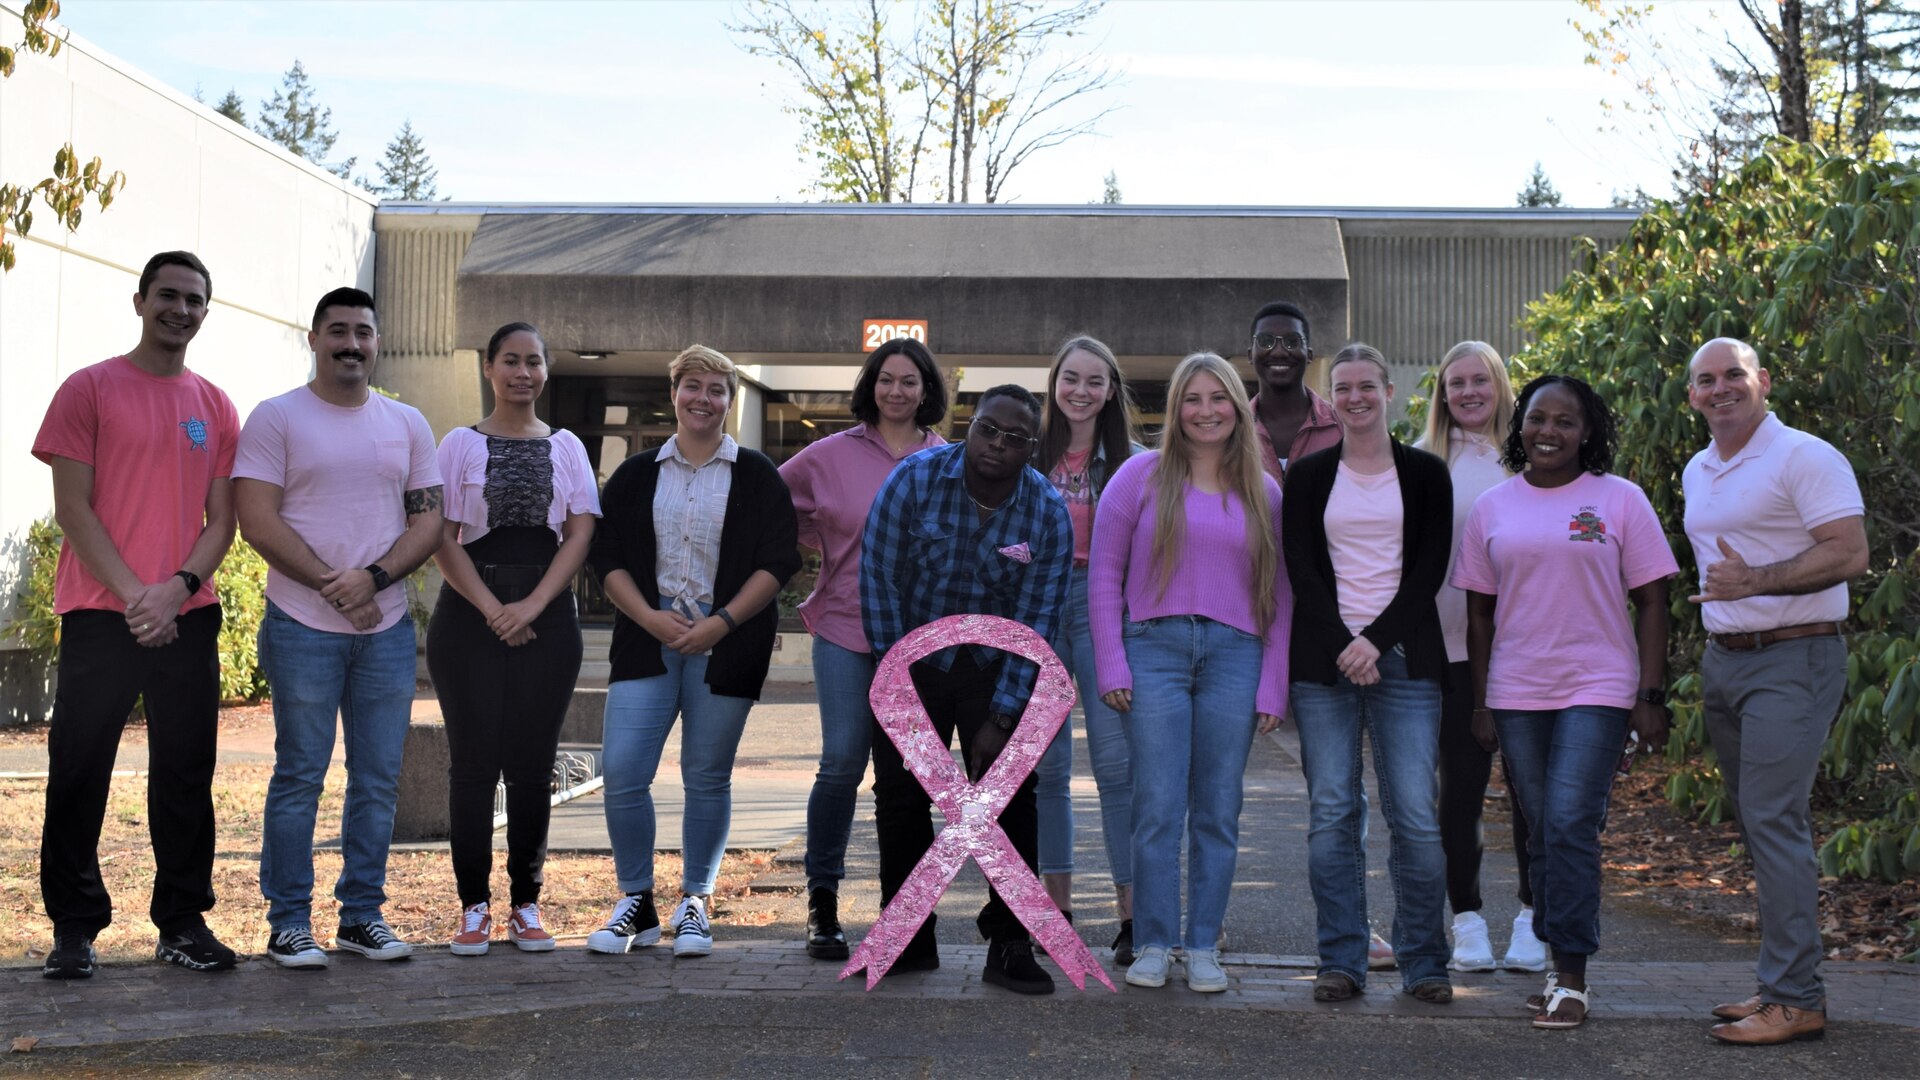 Pink ribbons fly high for breast cancer awareness as VA supports detection  and care - VA News